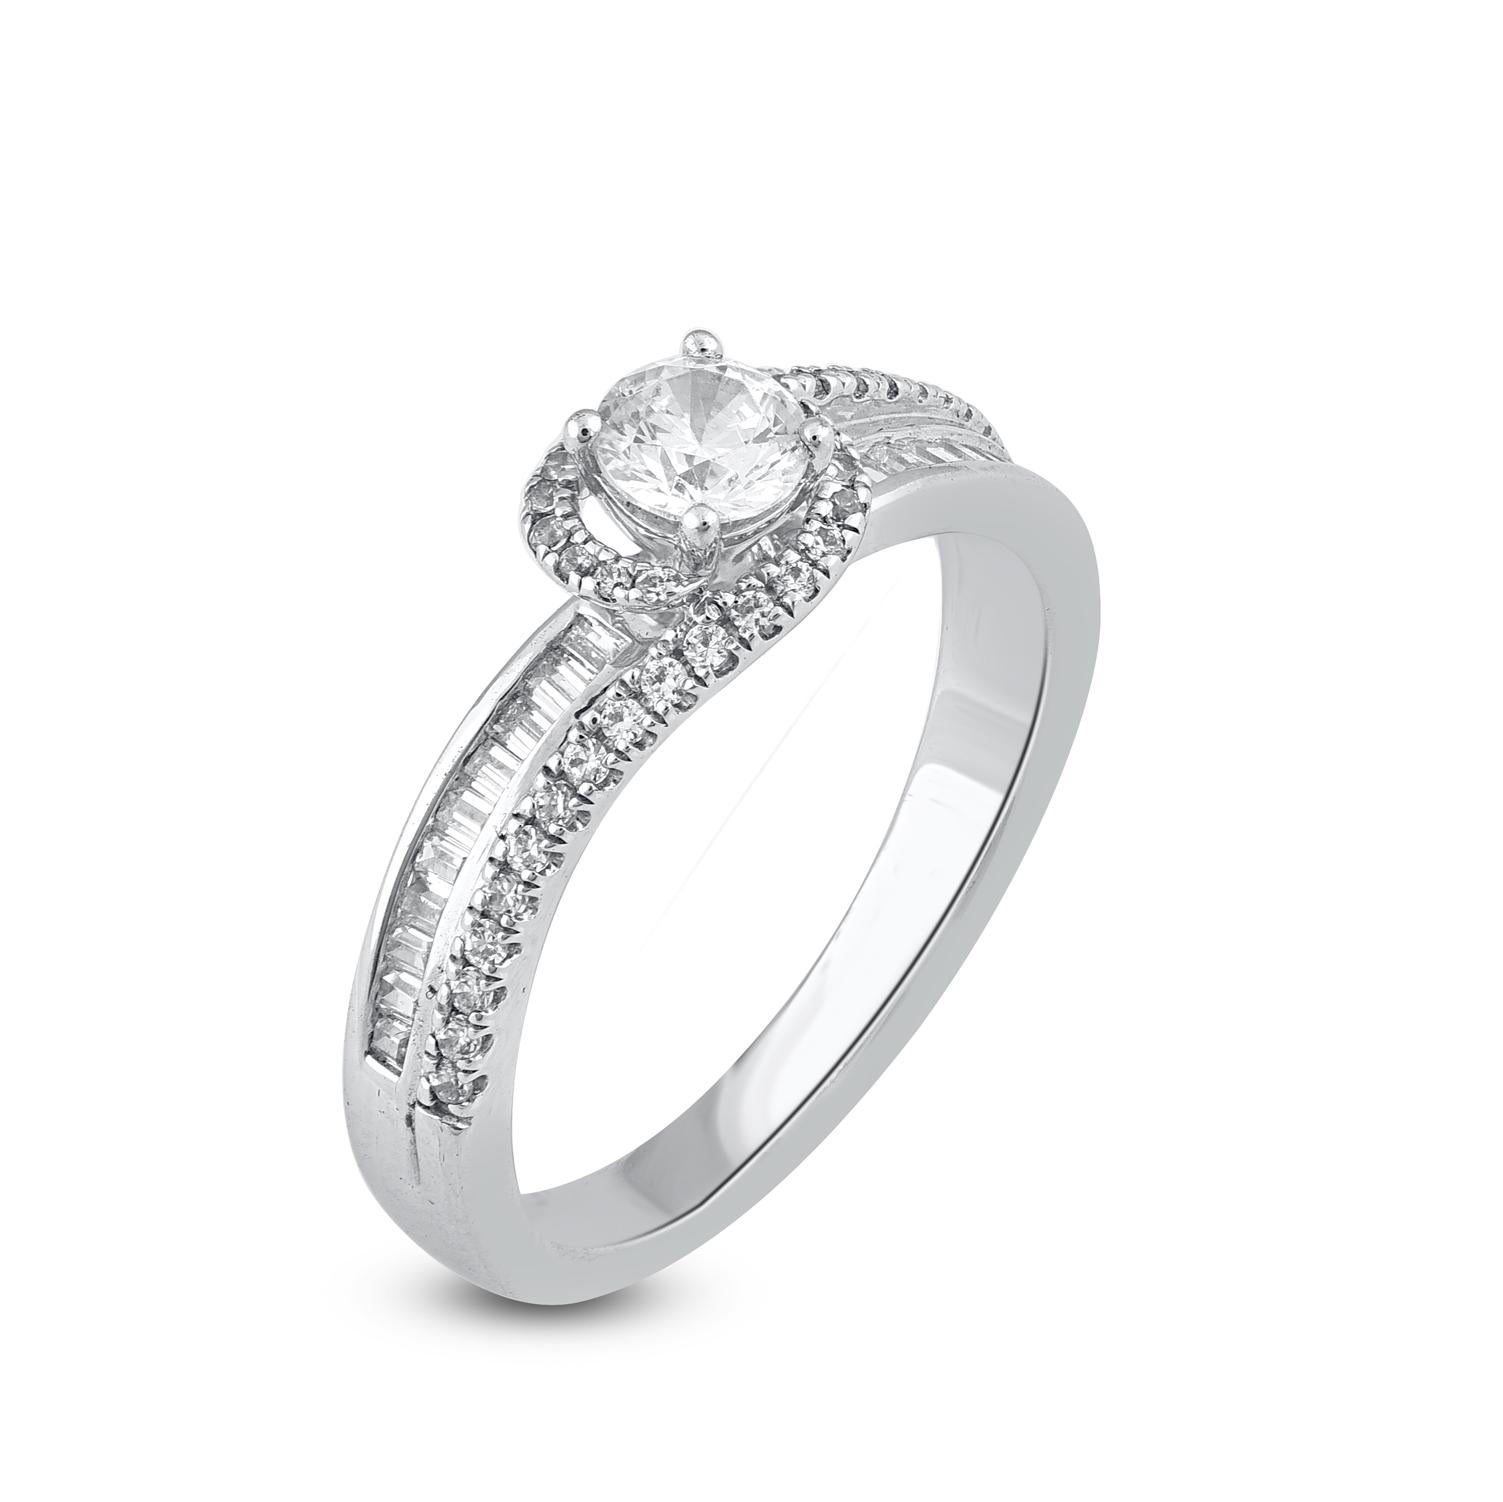 With style and shimmer, this diamond ring is perfect for any occasion. Beautifully crafted by our inhouse experts in 14 karat white gold and embellished with 63 brilliant cut, single cut round diamonds and baguette cut set in prong and channel